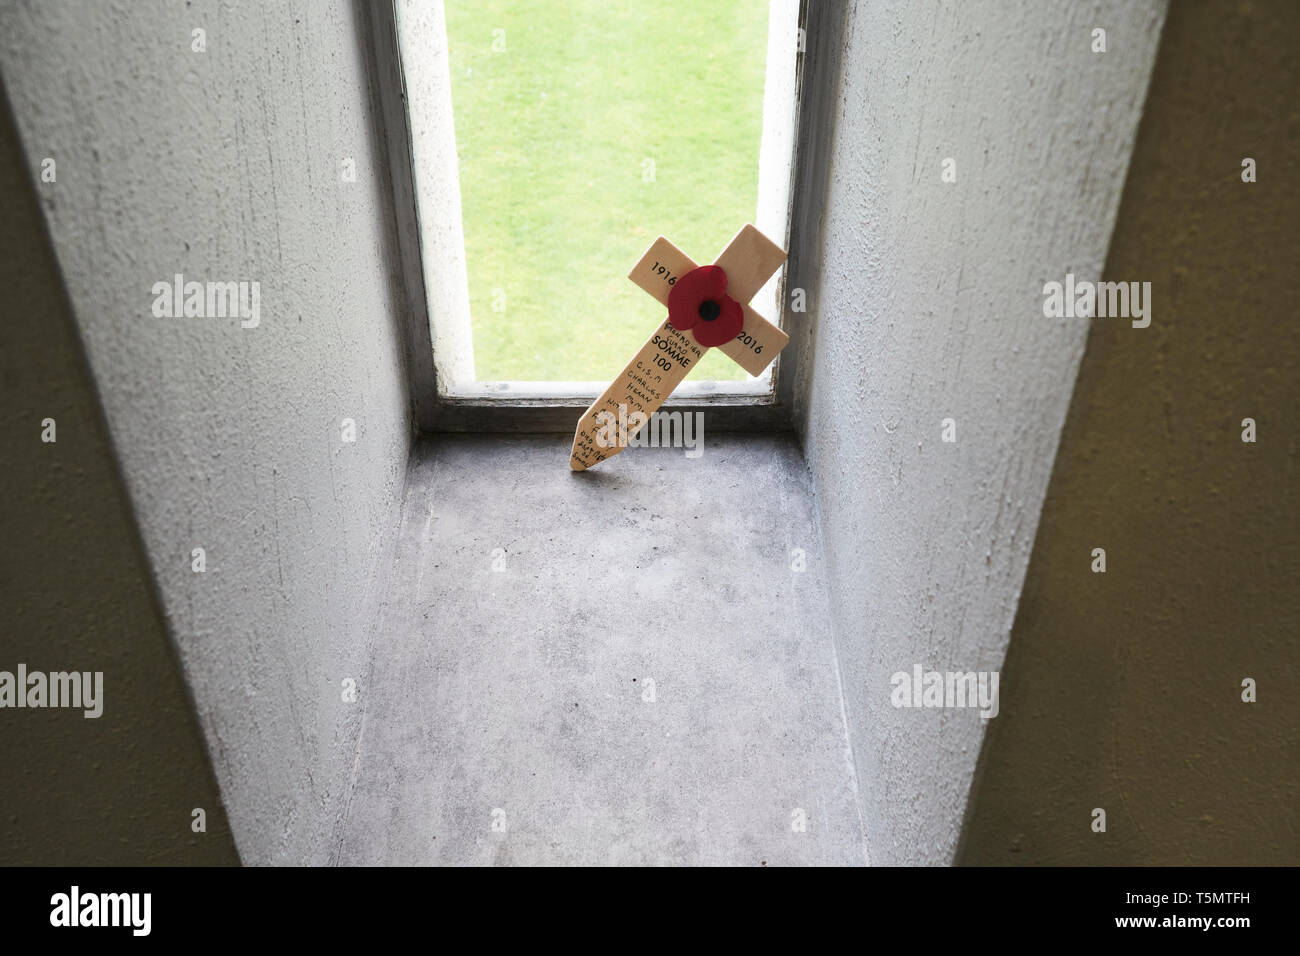 A remembrance cross for a fallen soldier at the Battle of the Somme placed inside one of the windows of the Guards' Chapel, London, UK. Stock Photo